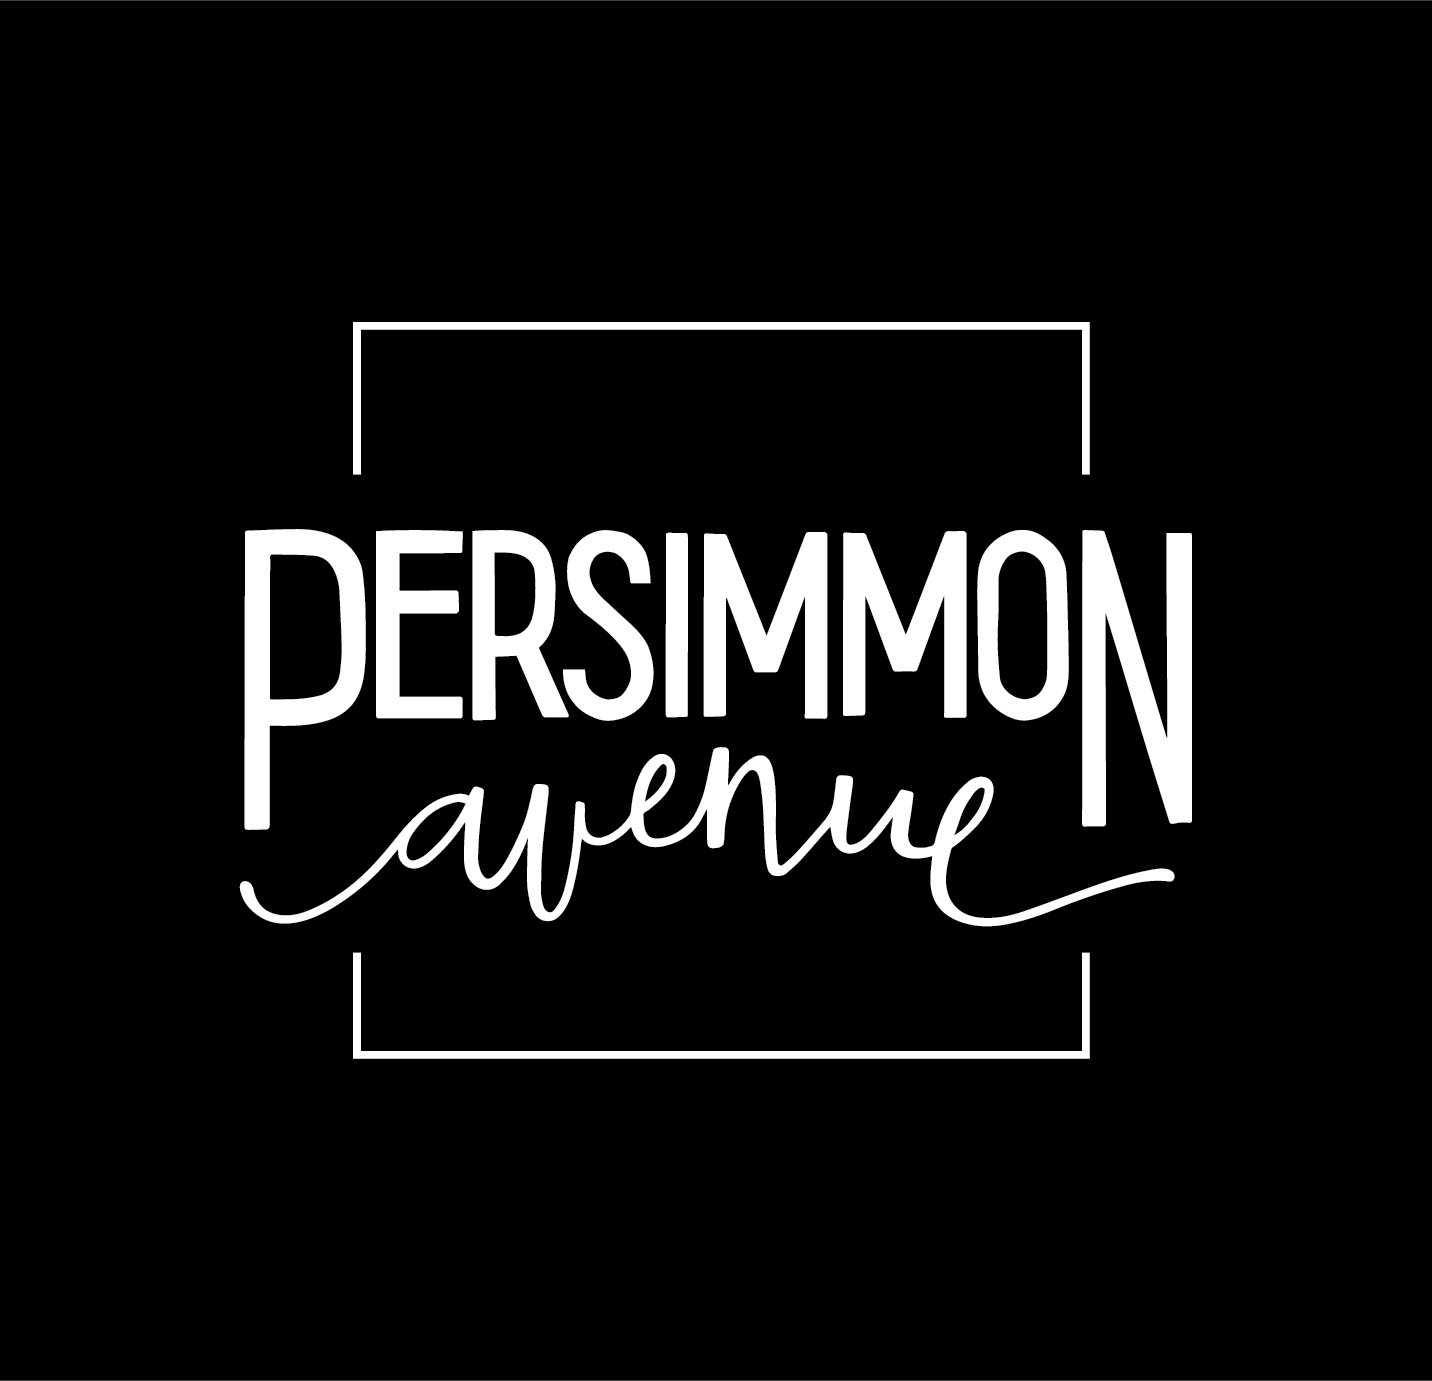 Persimmon Avenue.png